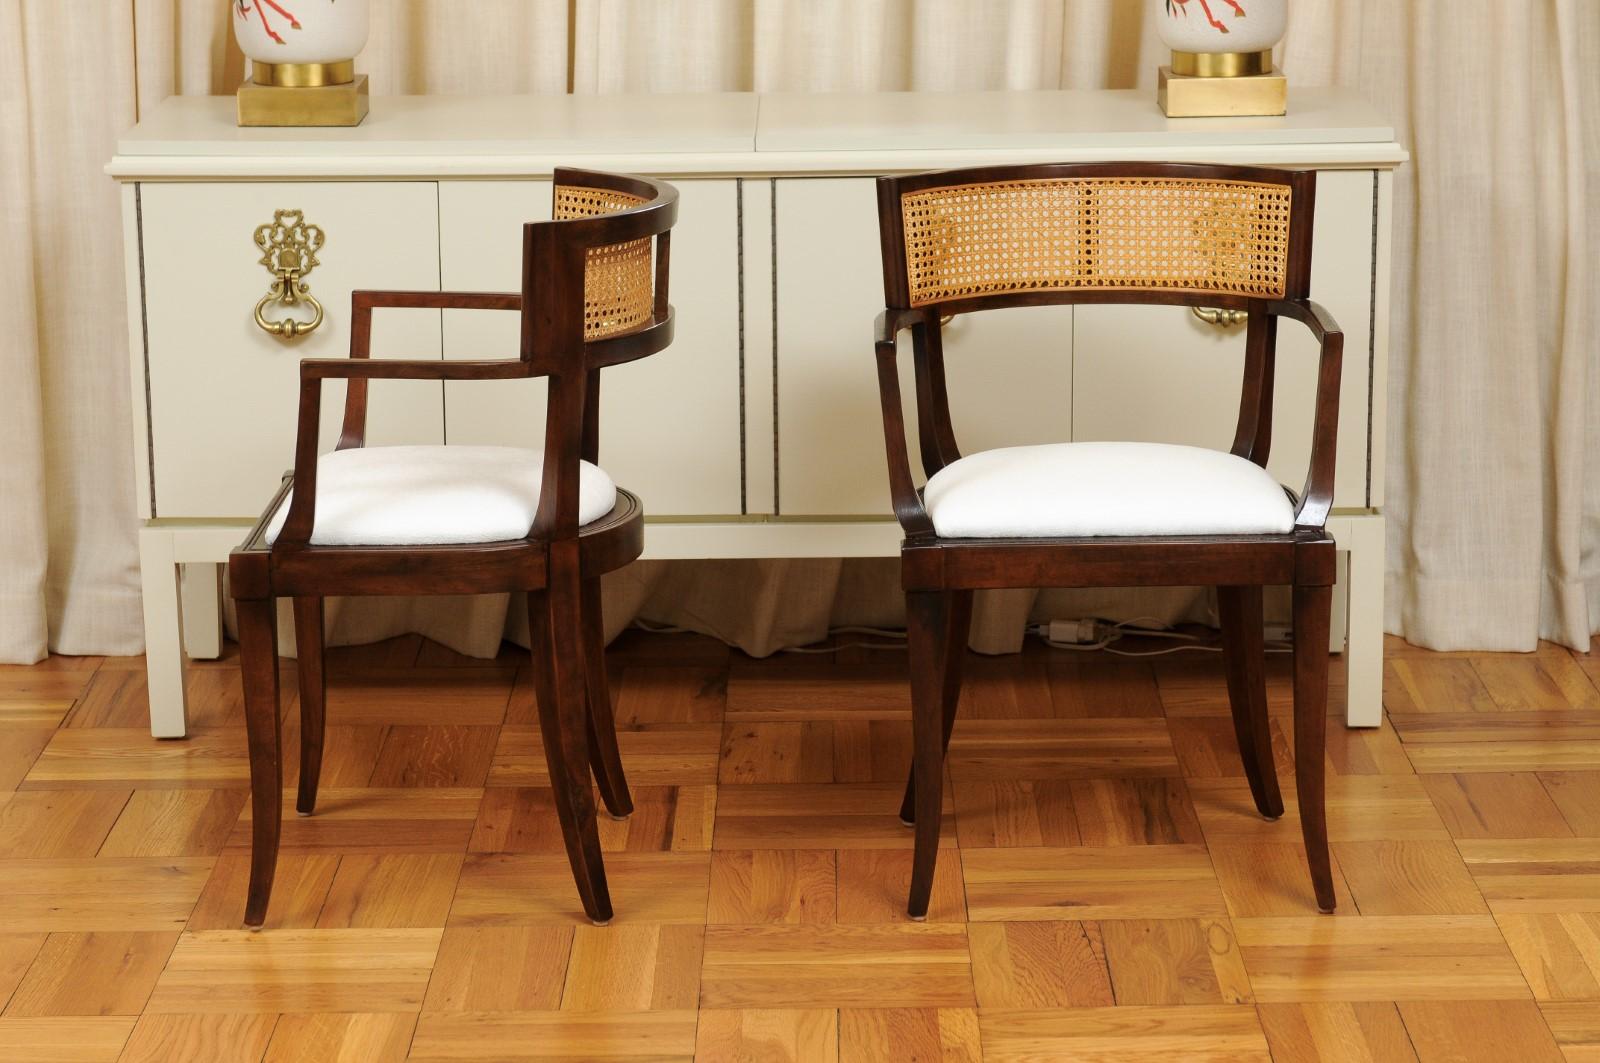 All Arms, Exquisite Set of 20 Klismos Cane Dining Chairs by Baker, circa 1958 For Sale 6